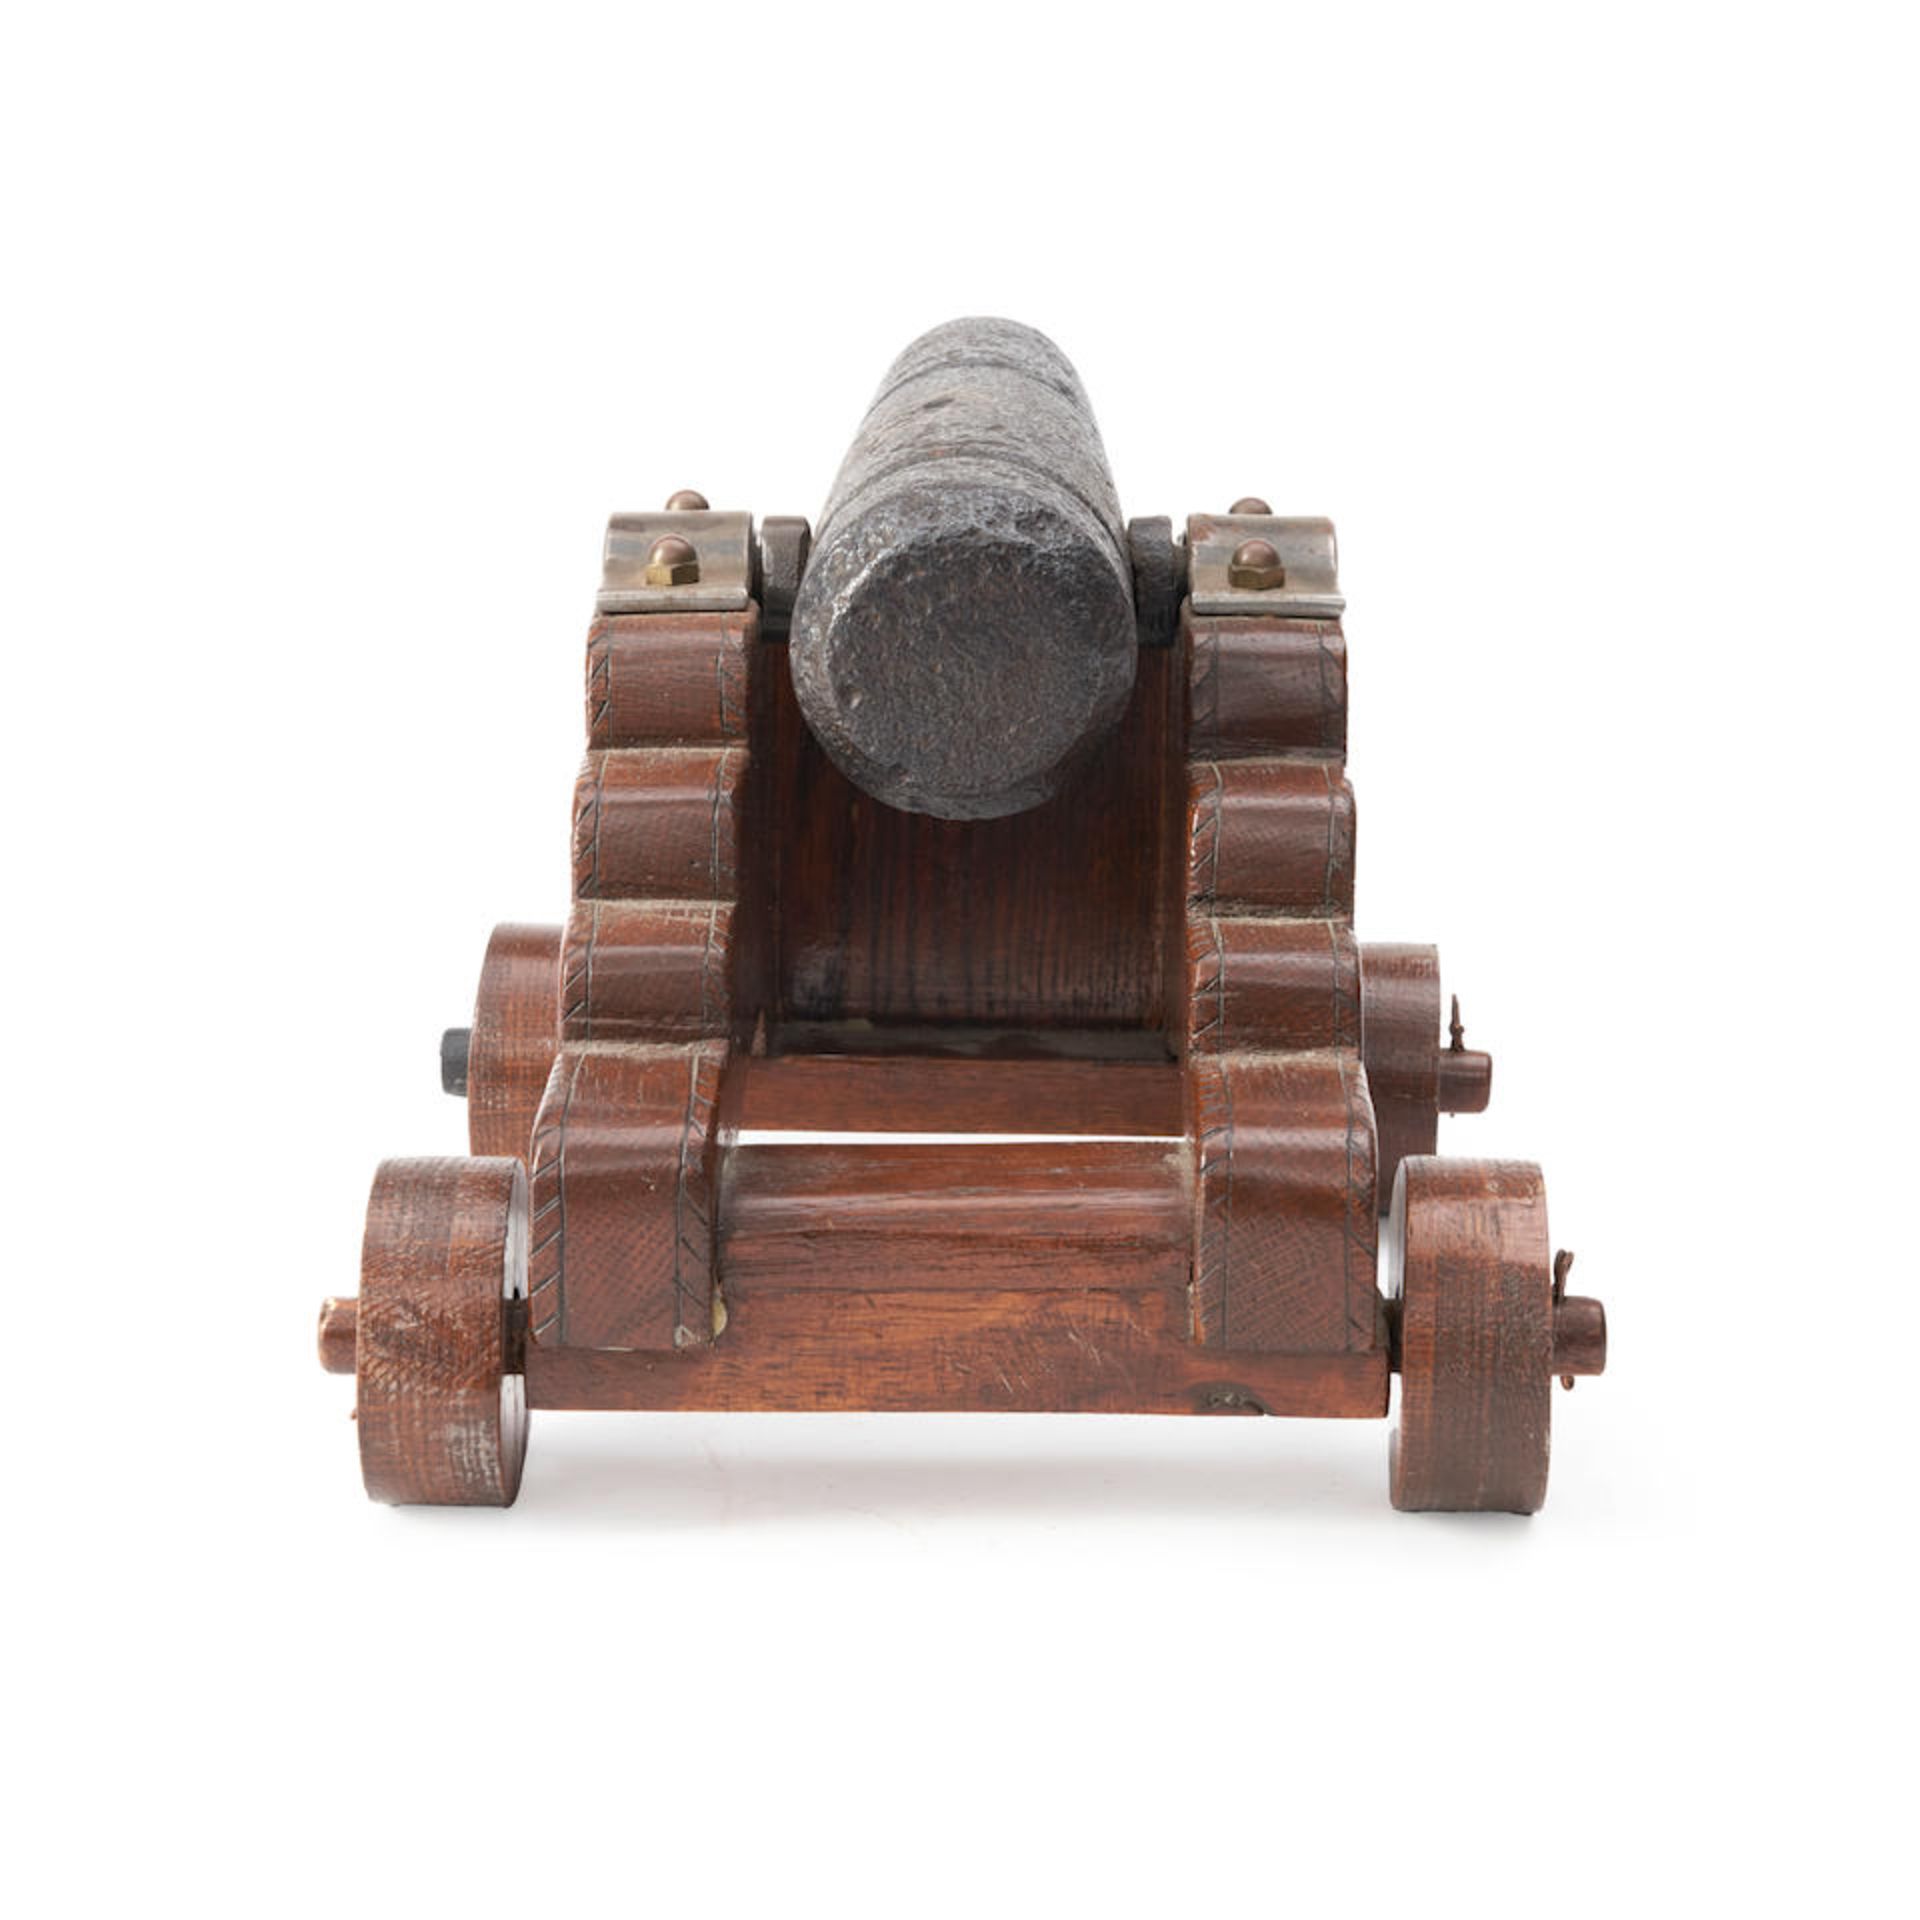 Miniature Cast Iron Naval Cannon and Carriage. - Image 2 of 2